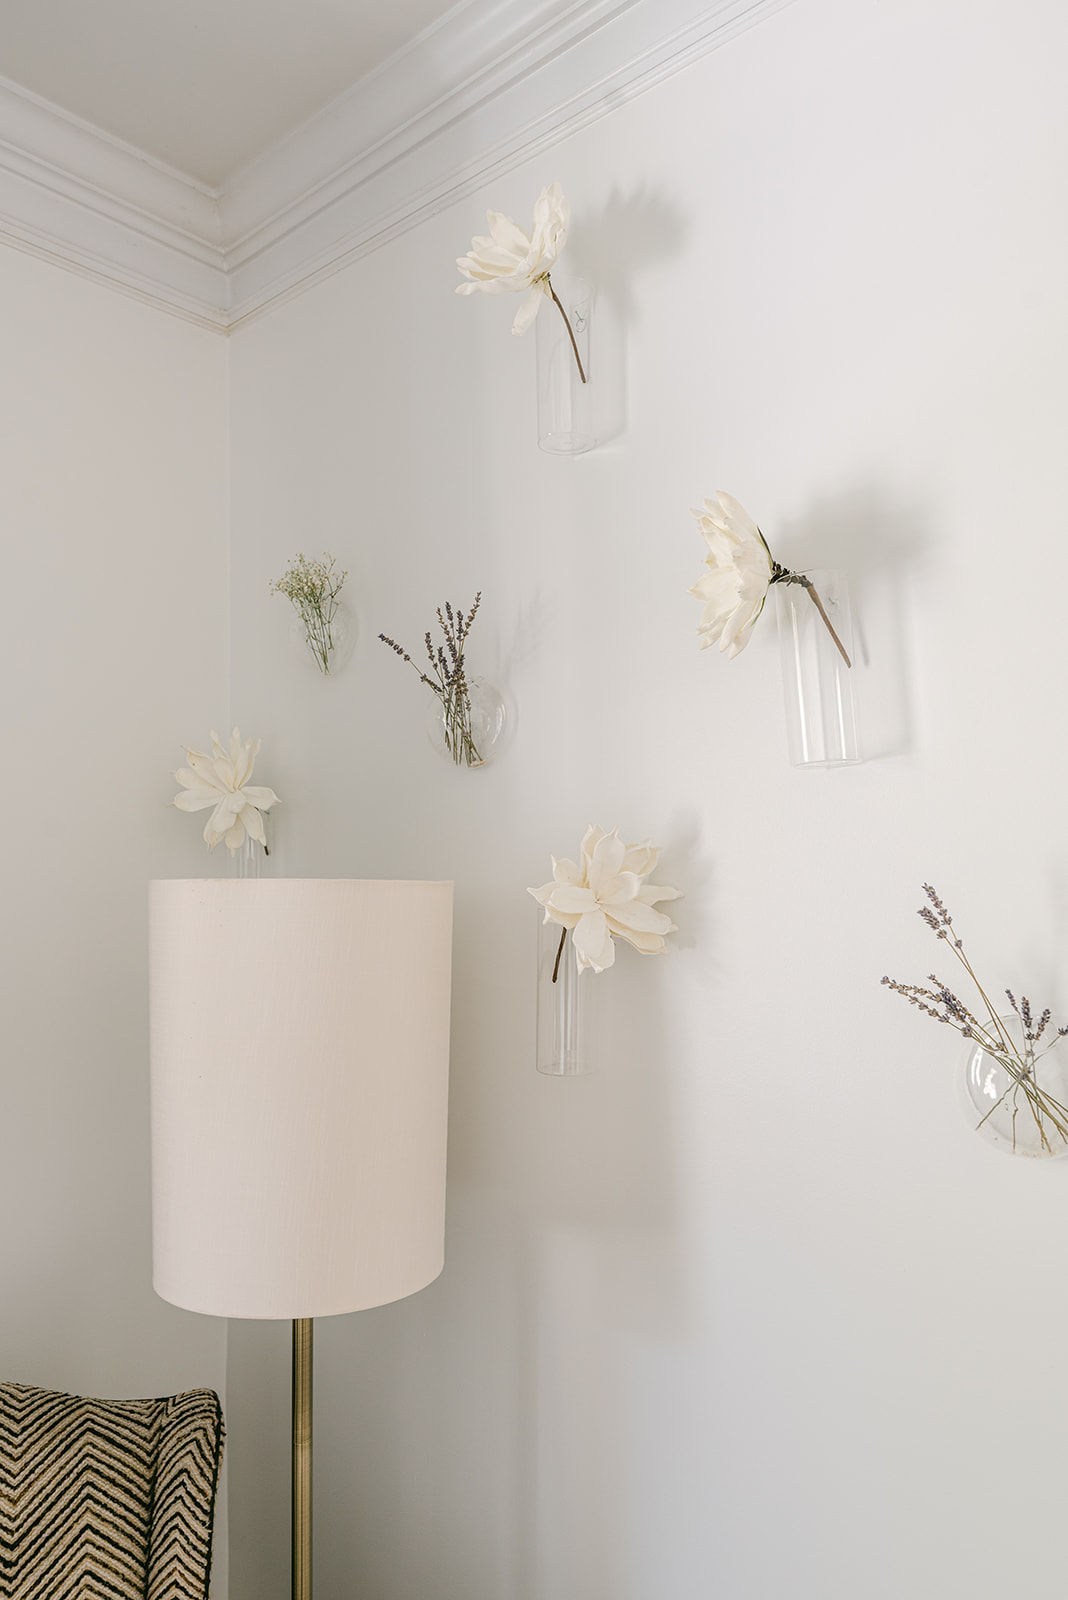 Floating-Vase-Minimalist-Decor-Large-Wall-3 How To Hang A Floating Vase Wall | Master Bedroom Decor